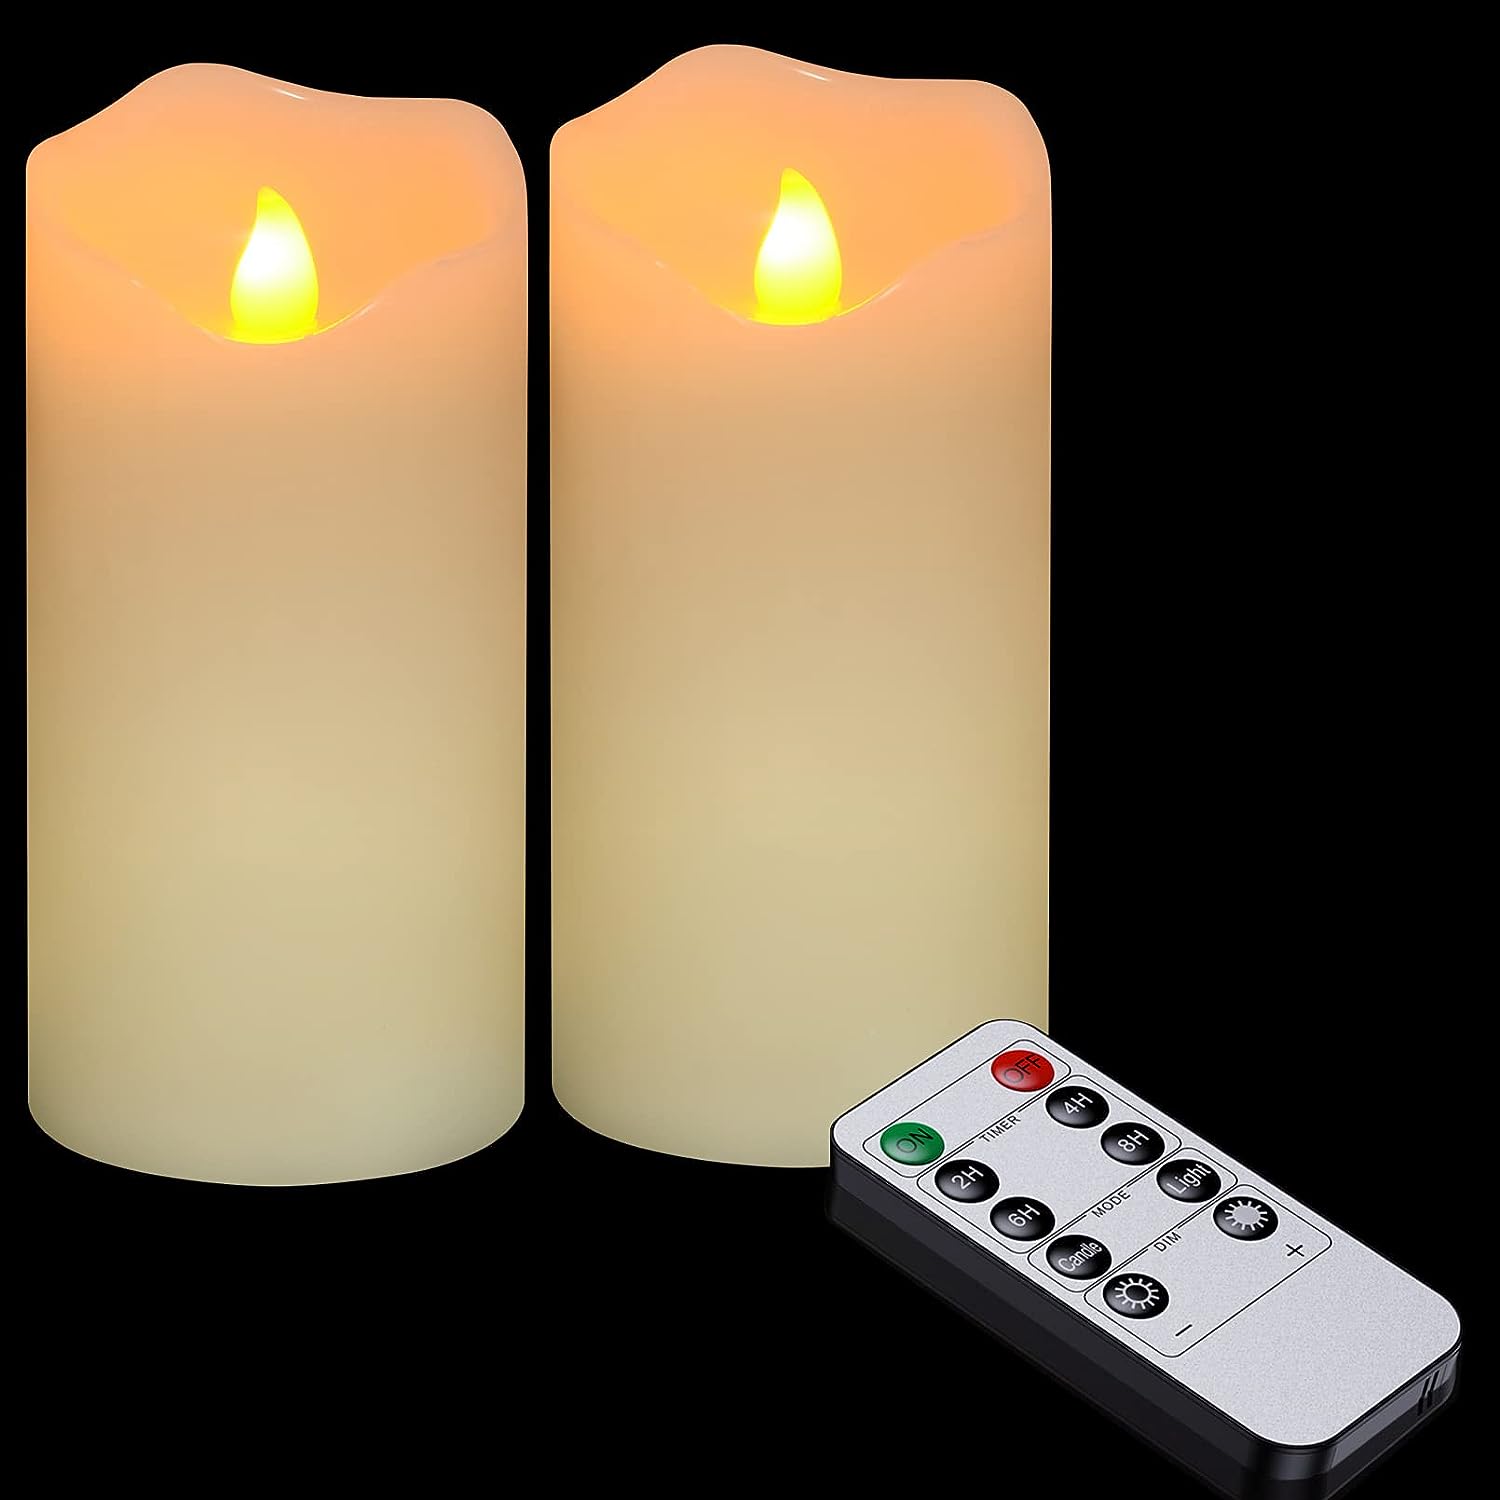 Ymenow Real Wax Pillar Candles with Remote, 2pcs Battery Operated Flameless Real Wax LED Pillar Candl